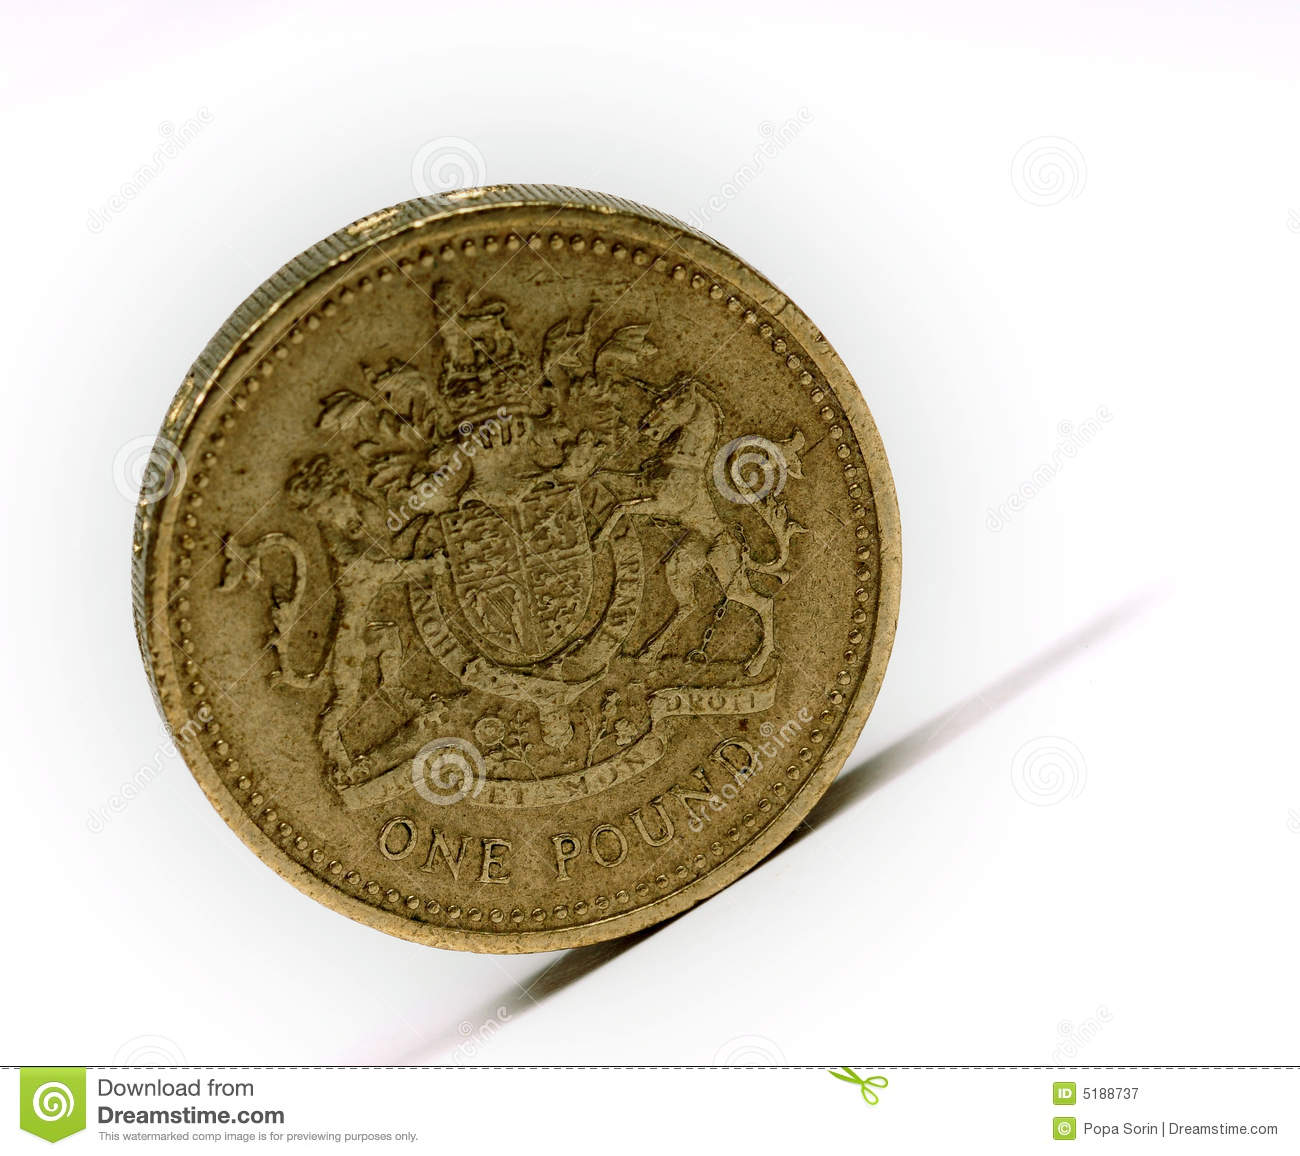 Pound sterling... Free Stock Photography: One pound sterling